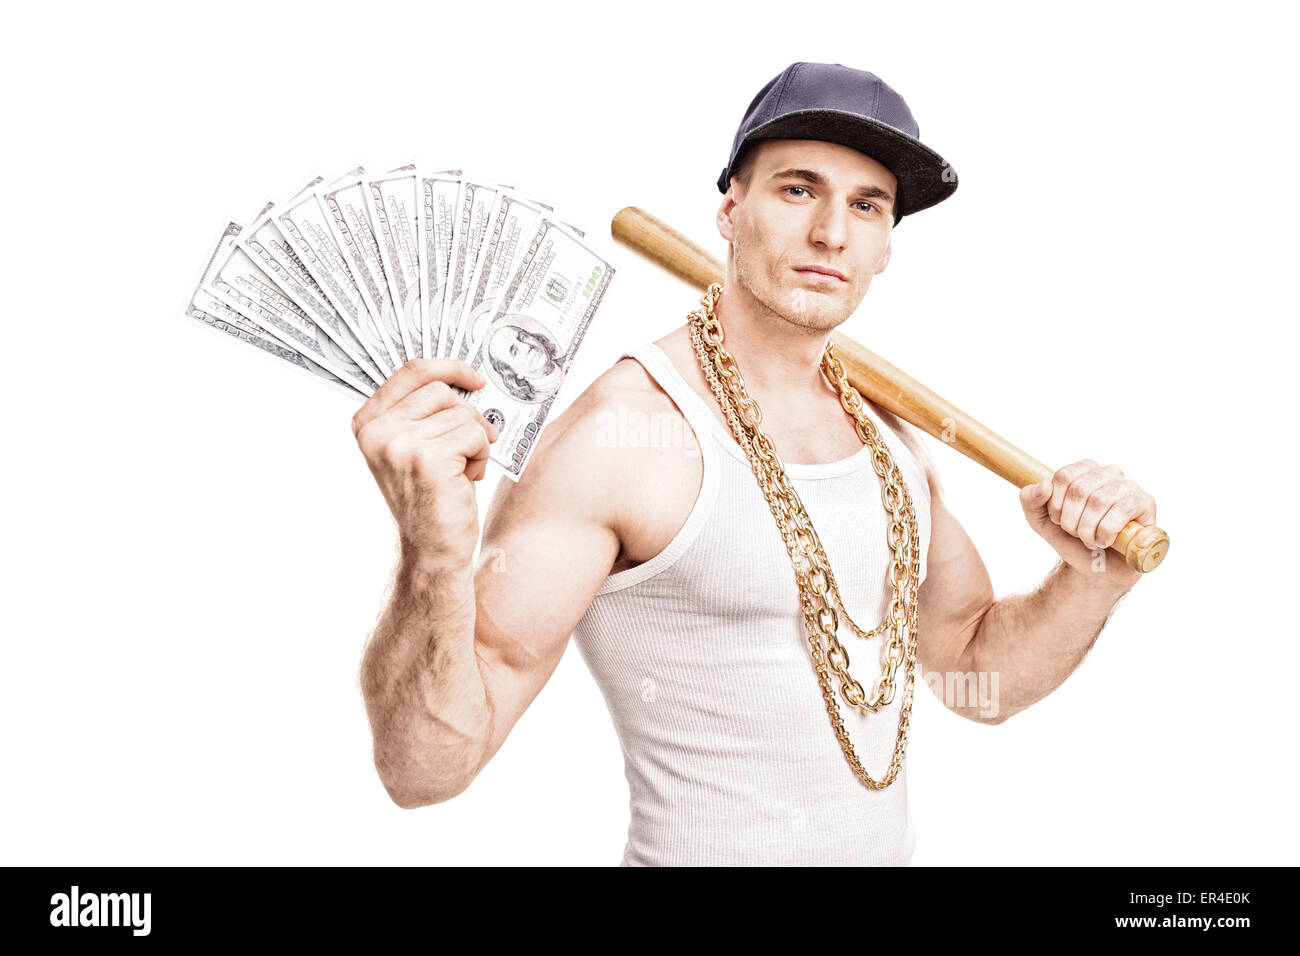 Thug with gold chain around his neck holding a baseball bat and a stack of money isolated on white background Stock Photo